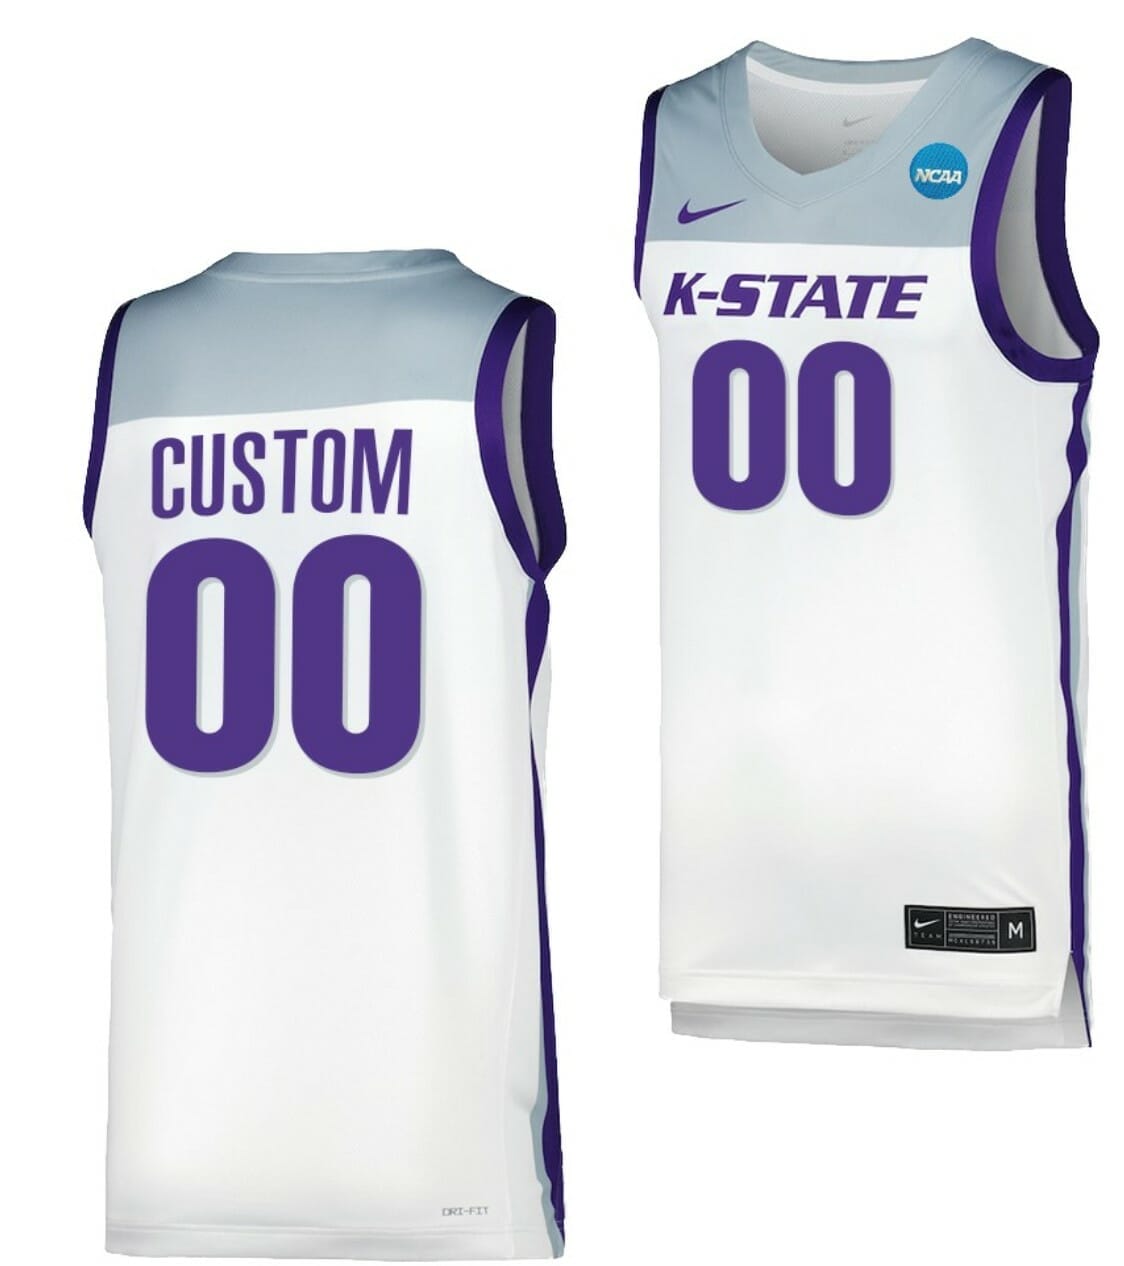 BASKETBALL MEMPHIS 18 JERSEY FREE CUSTOMIZE OF NAME AND NUMBER